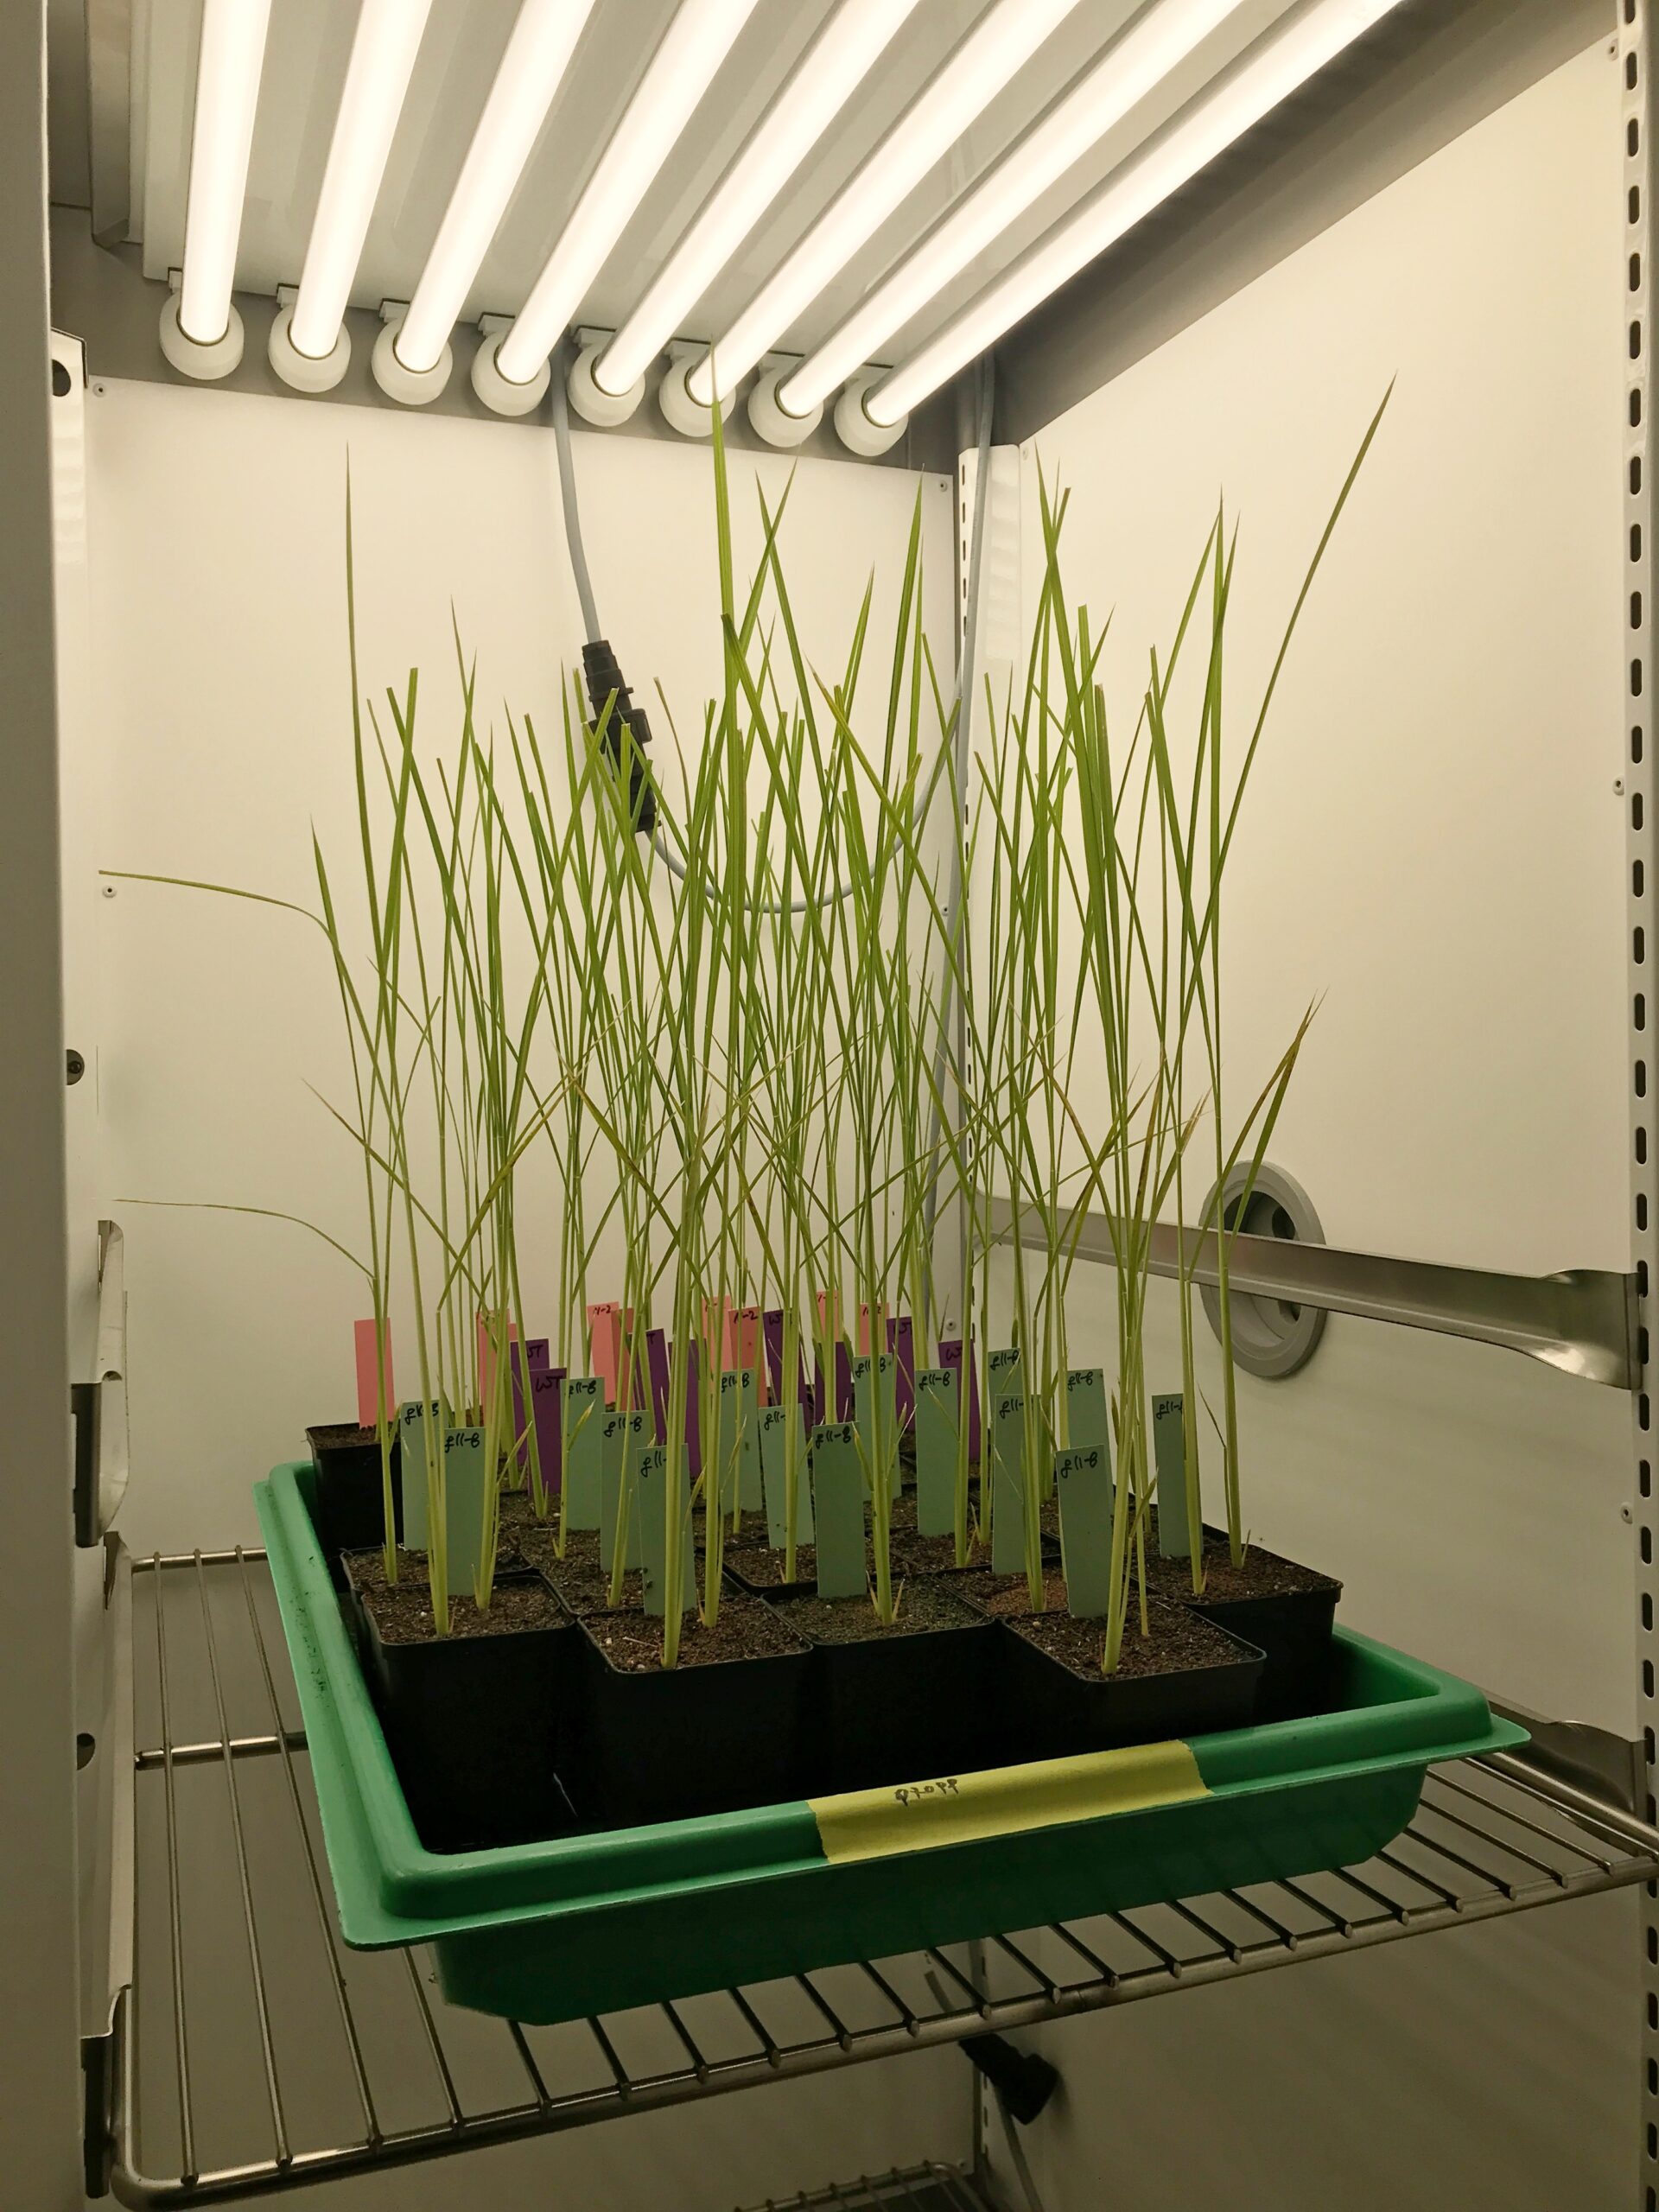 Aralab-Rice-growth-FitoClima-PLH-white-LED-Max-Planck-scaled